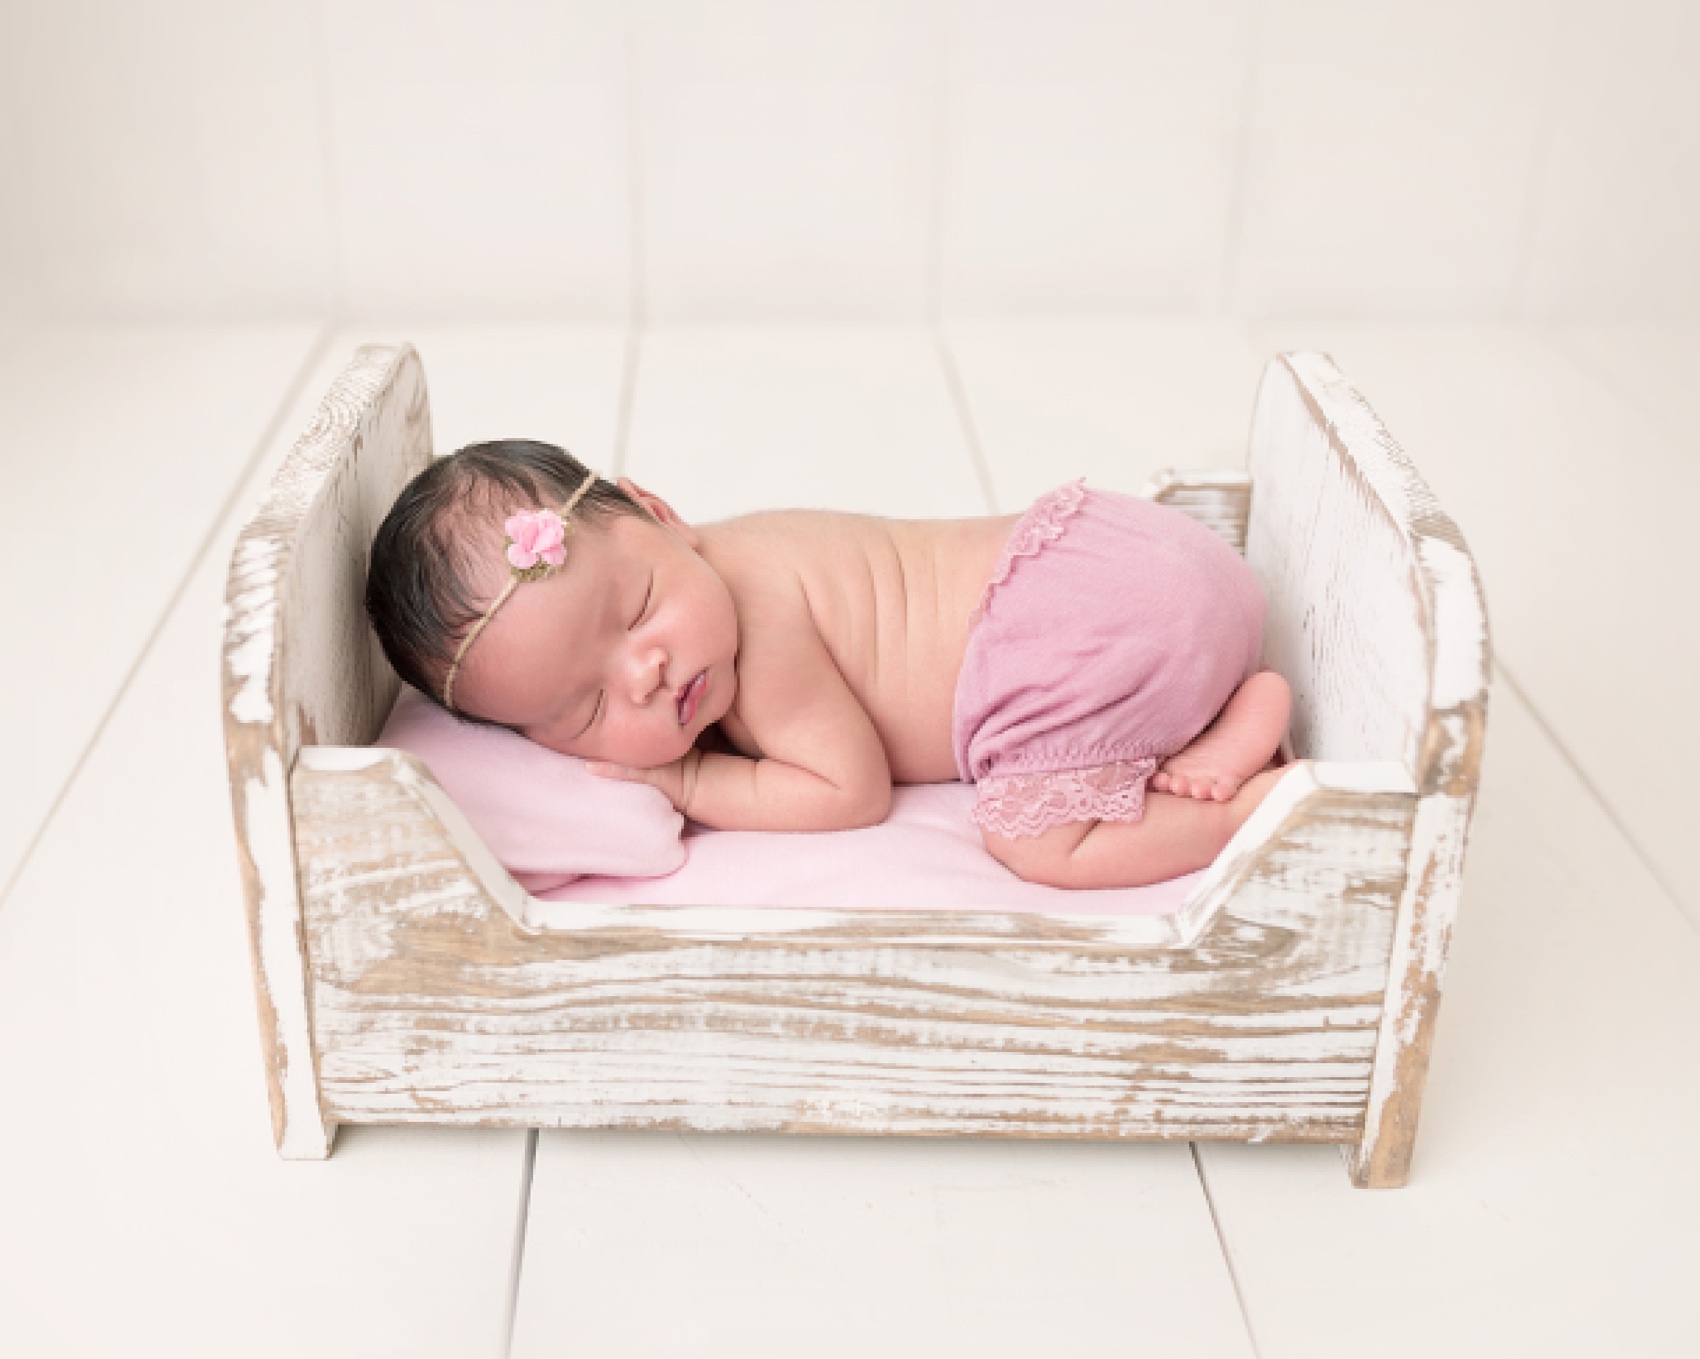 newborn baby girl sleeping on a bed in a pink wrap Houston Lactation Consultants